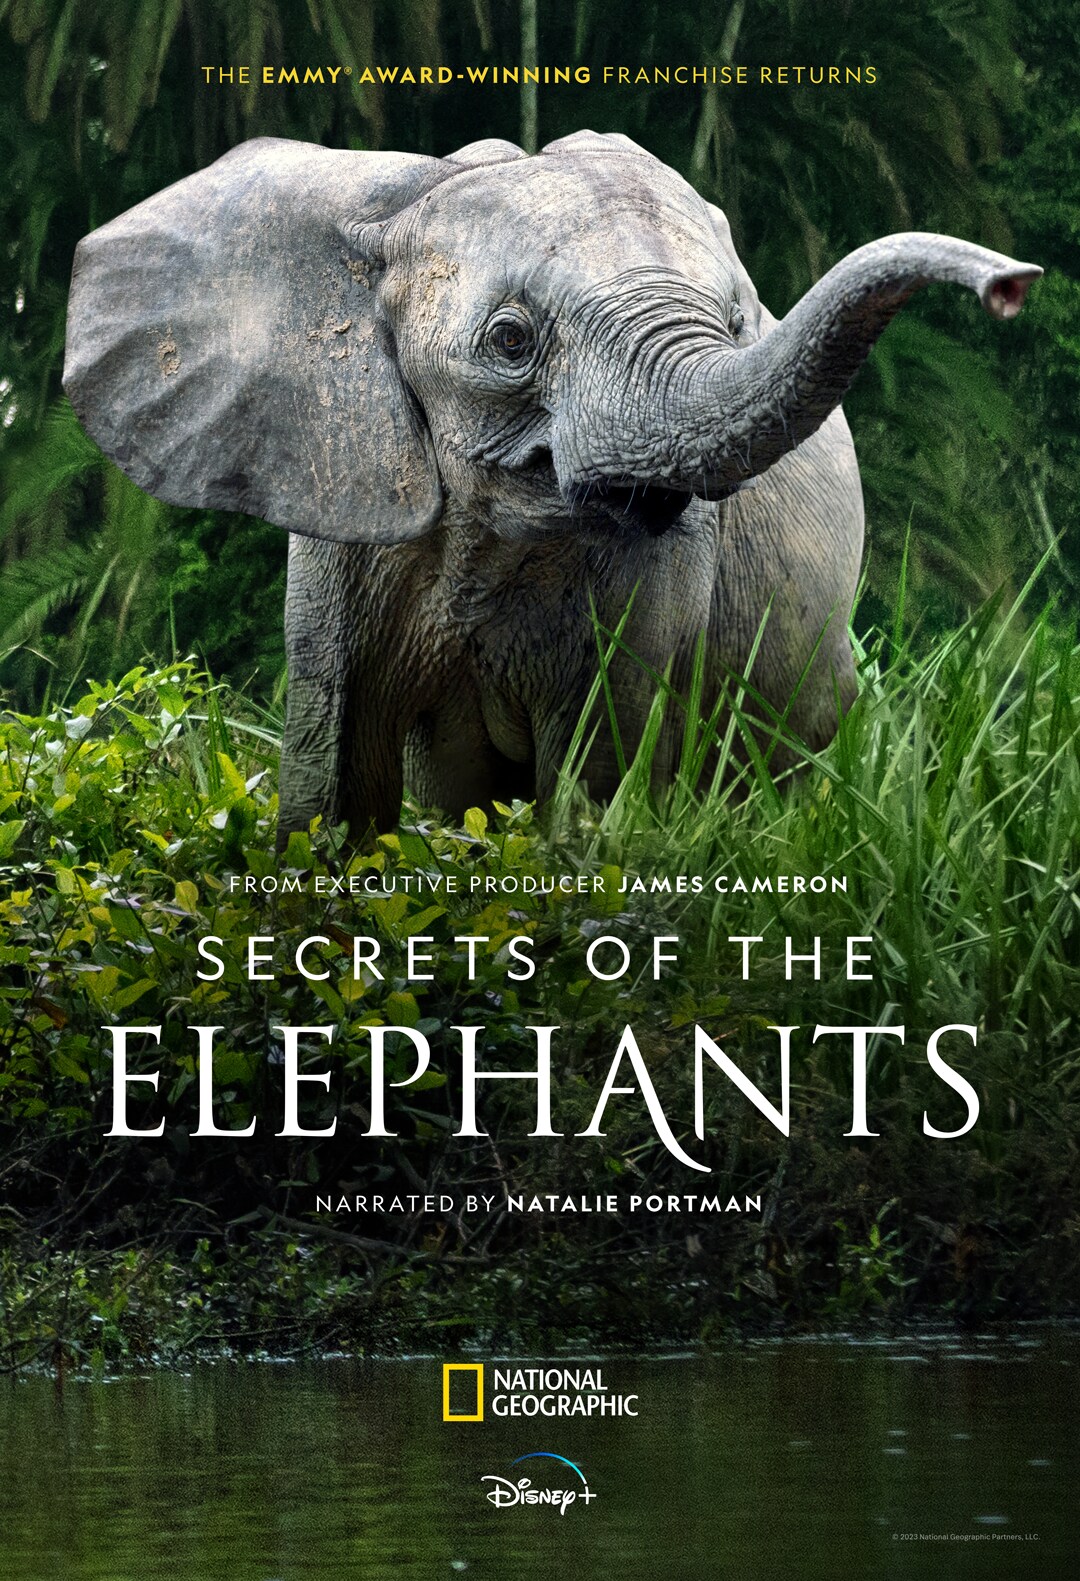 An elephant raises its trunk on the poster for Secrets of the Elephants